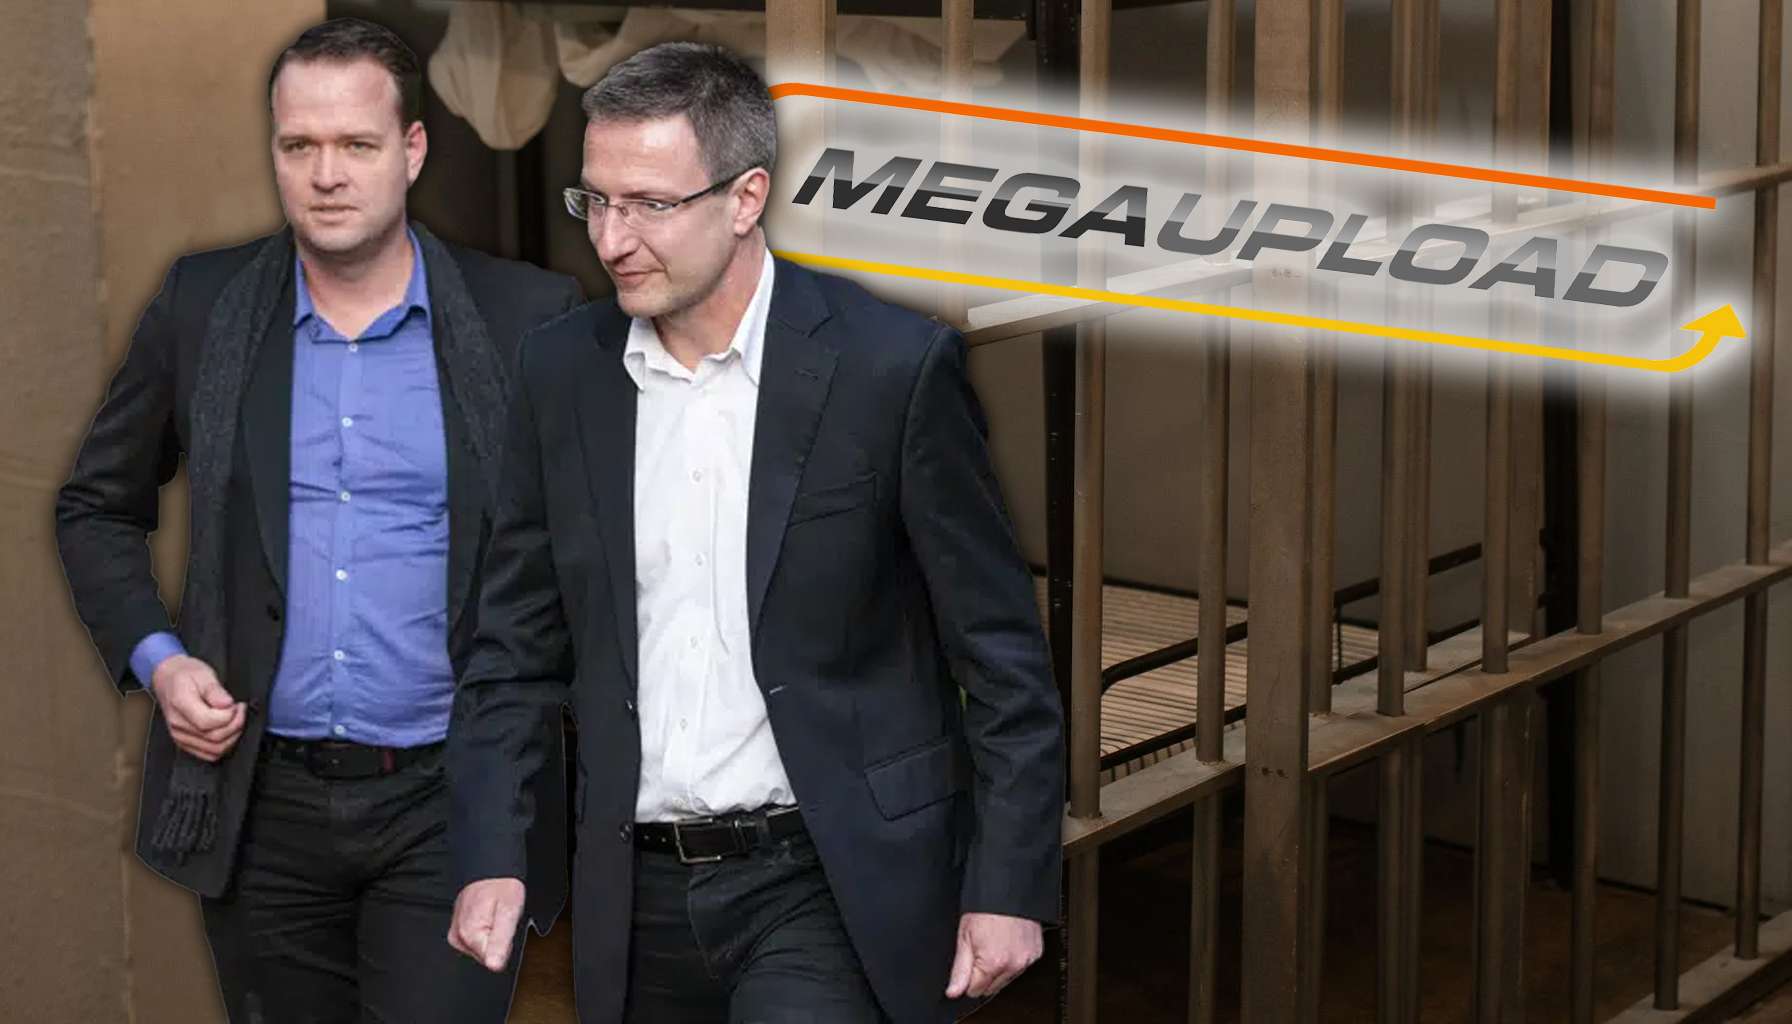 megaupload admins with logo and jail behind